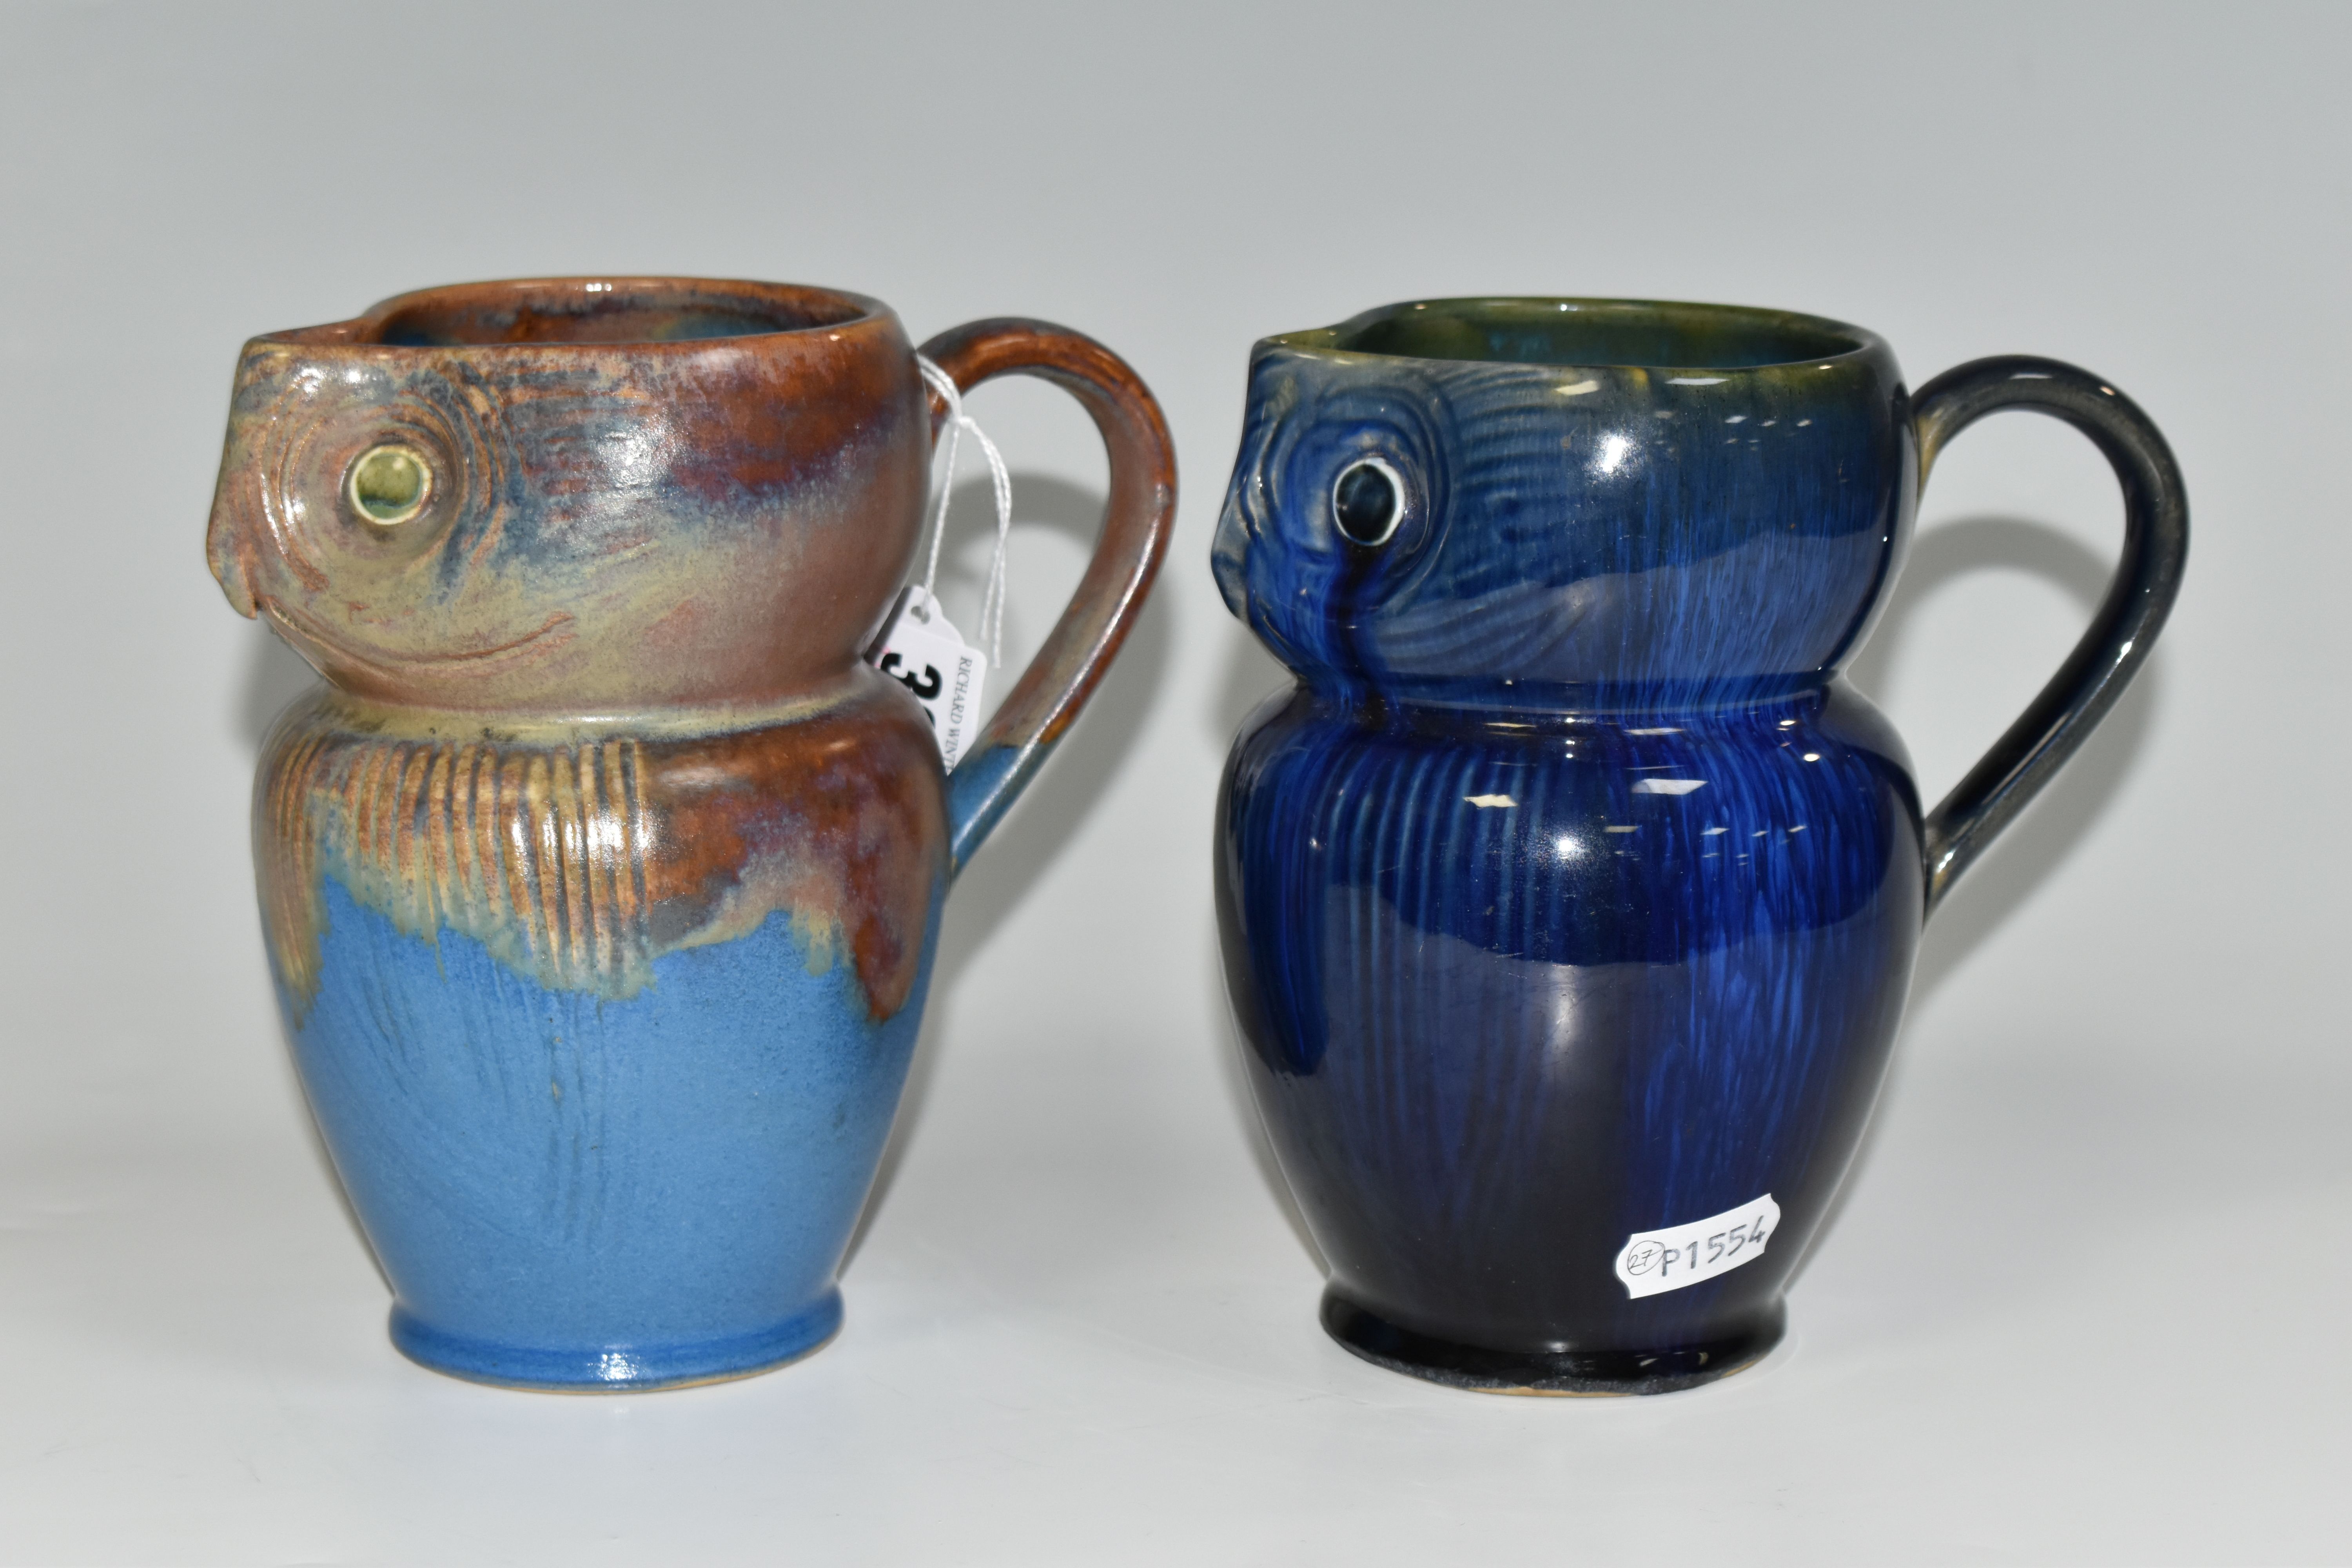 TWO BOURNE DENBY OWL JUGS, 1920s-1930s Danesby Ware, one with mid blue and brown glaze, the other - Image 2 of 6